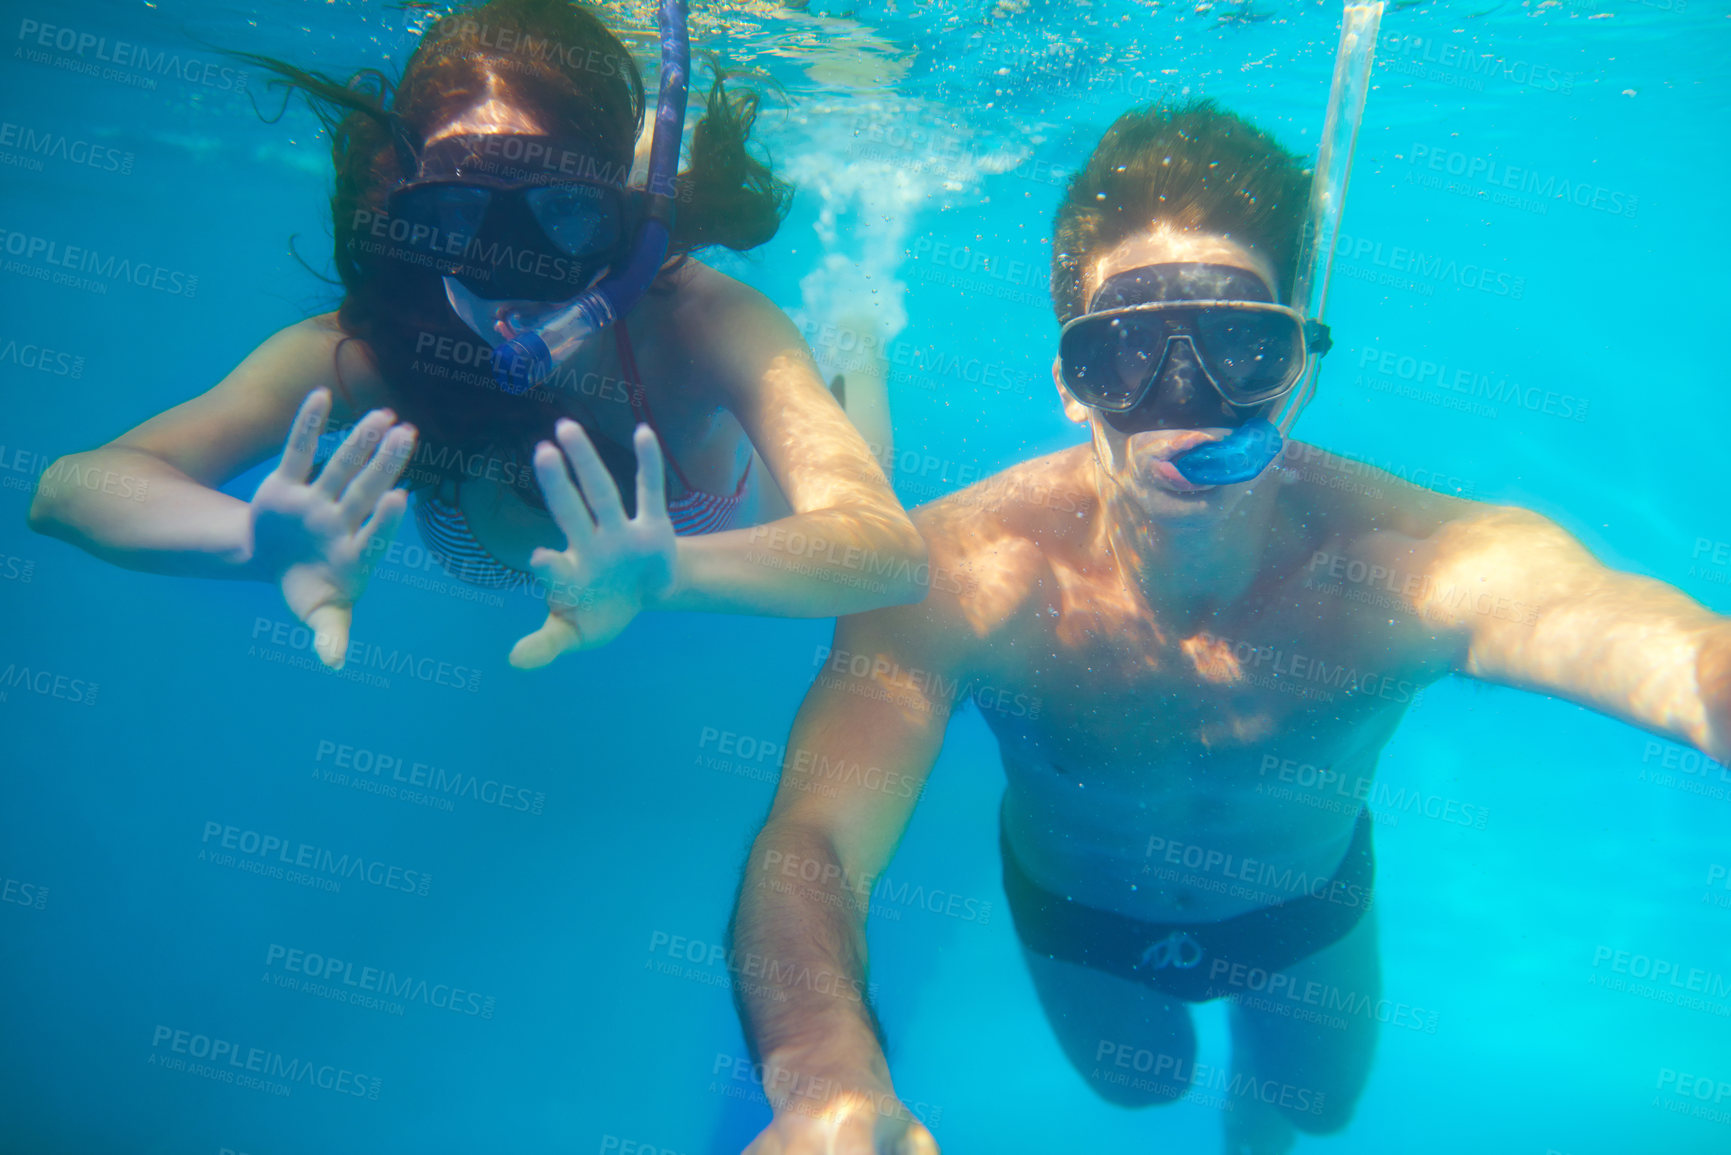 Buy stock photo Scuba diving, underwater or couple swimming on holiday to explore for marine adventure, hobby or vacation. Mask, divers or people at sea or ocean for travel, tropical environment or outdoor activity